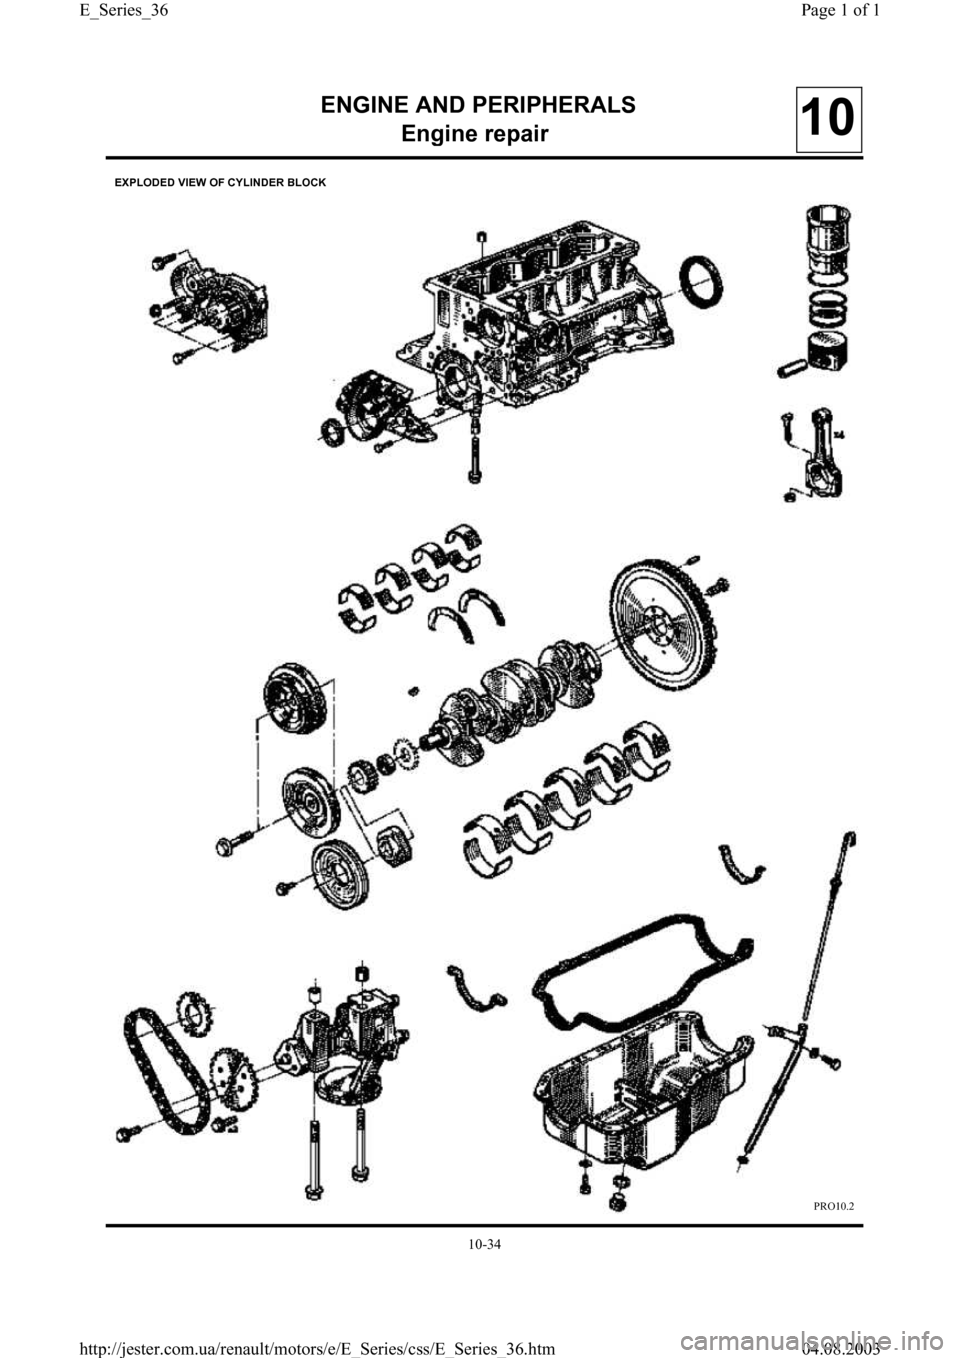 RENAULT CLIO 1997 X57 / 1.G Petrol Engines Owners Guide ENGINE AND PERIPHERALS
En
gine repair10
EXPLODED VIEW OF CYLINDER BLOCK
PRO10.2
10-34
Page 1 of 1 E_Series_36
04.08.2003 http://jester.com.ua/renault/motors/e/E_Series/css/E_Series_36.htm 